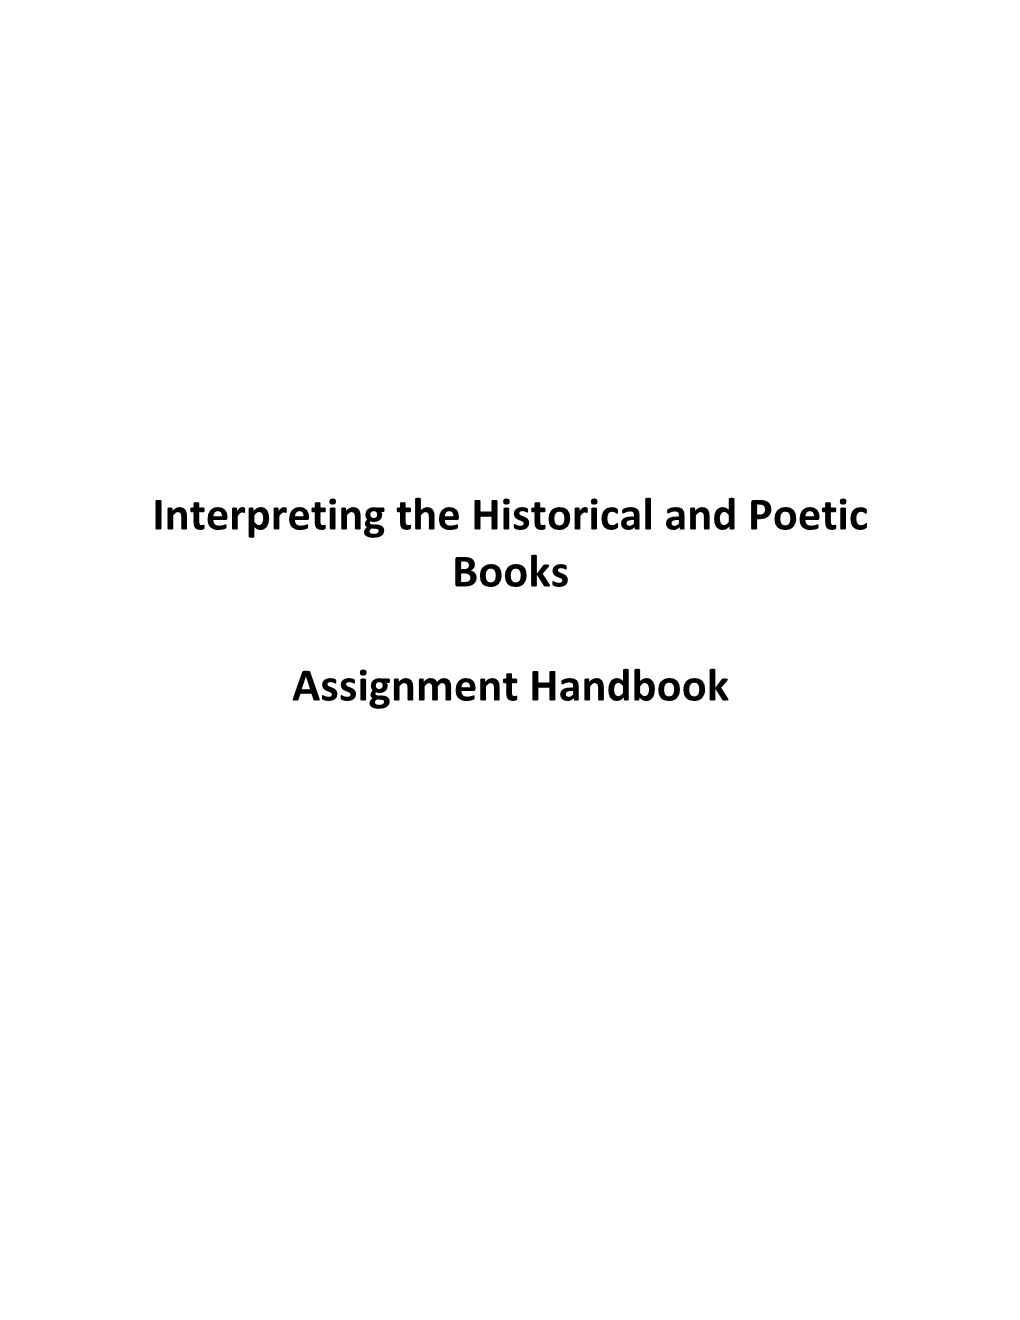 Interpreting the Historical and Poetic Books